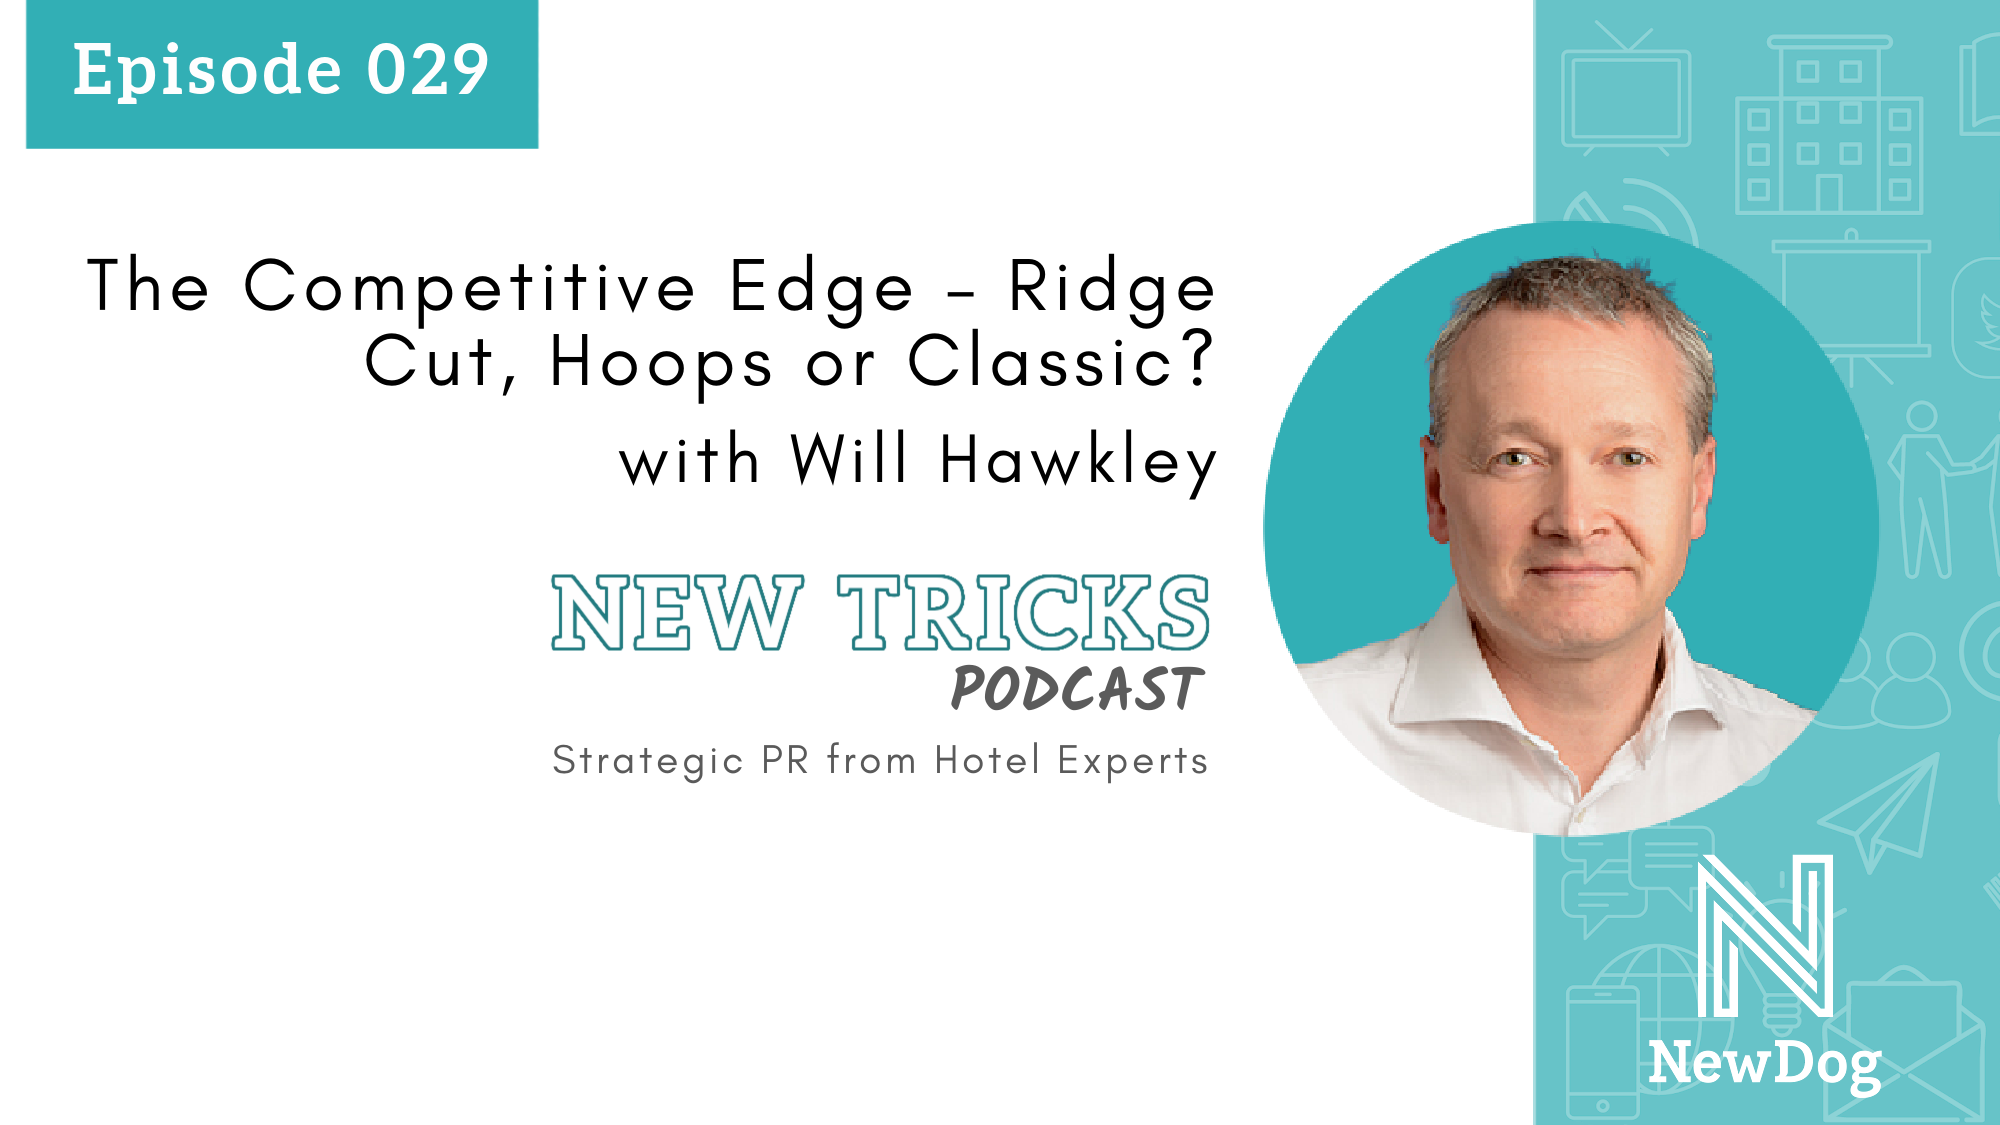 ep29 banner - new tricks podcast by new dog pr - strategic pr from hotel experts